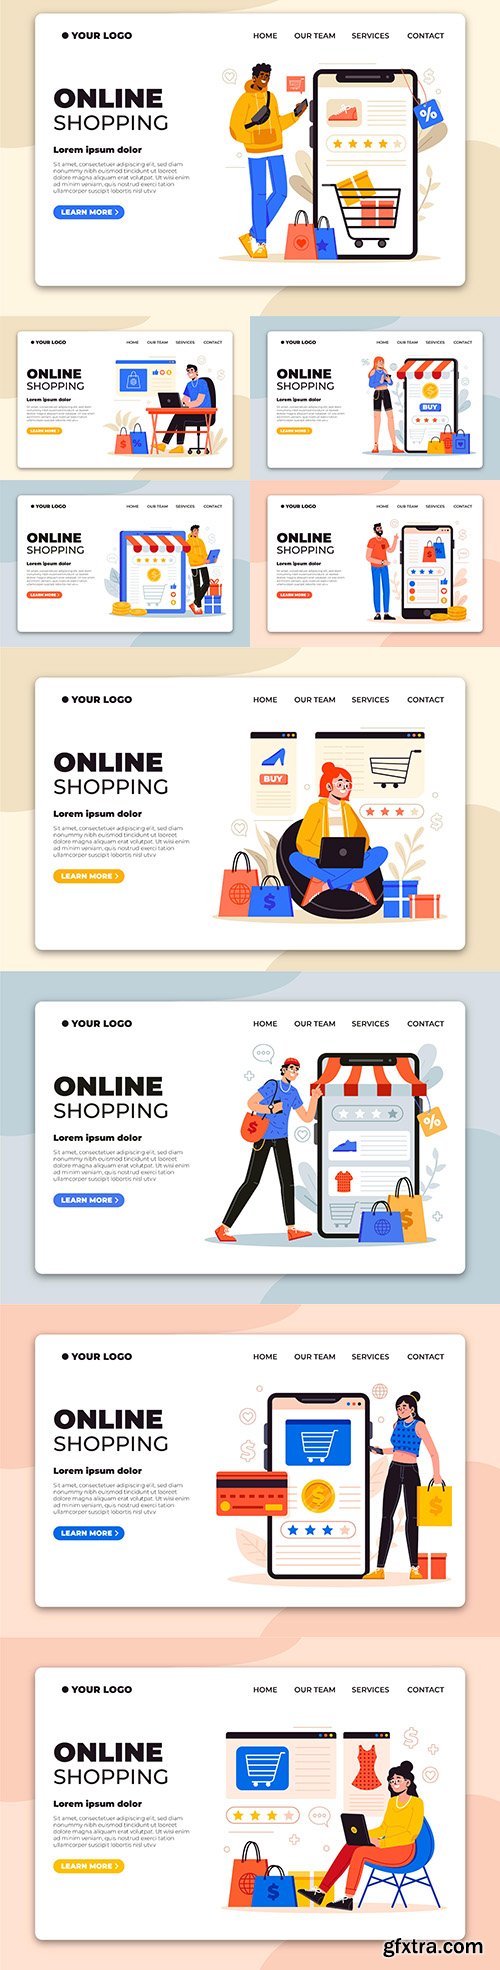 Shopping online on mobile app landing page concept